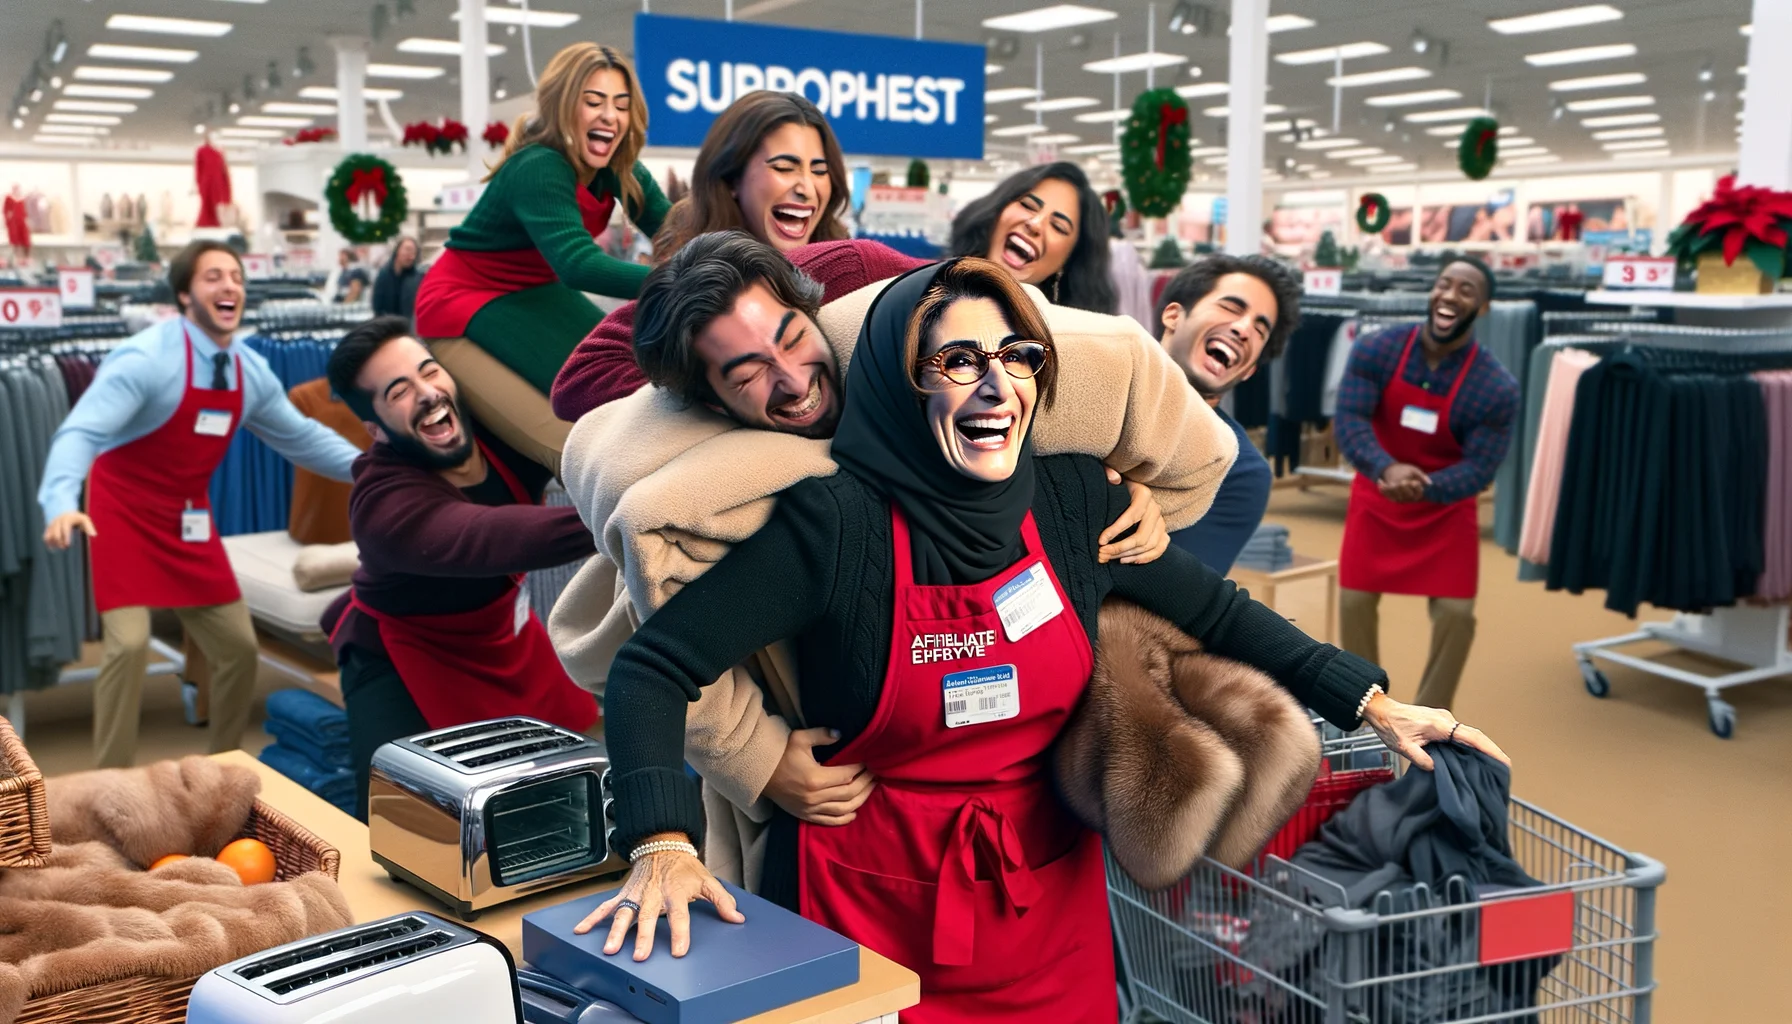 Generate a humorous and realistic image of an affiliate employee at a well-known, unnamed national department store. The employee is a jovial Middle-Eastern woman, wearing a classic red apron over a black outfit. In the funniest scenario, she's trying to balance a pile of various sales items in her arms, including clothing, a toaster, and a faux fur rug while customers are laughing good-naturedly all around her. The department store has holiday decorations all around, contributing to the joyfulness and chaos of the scene.